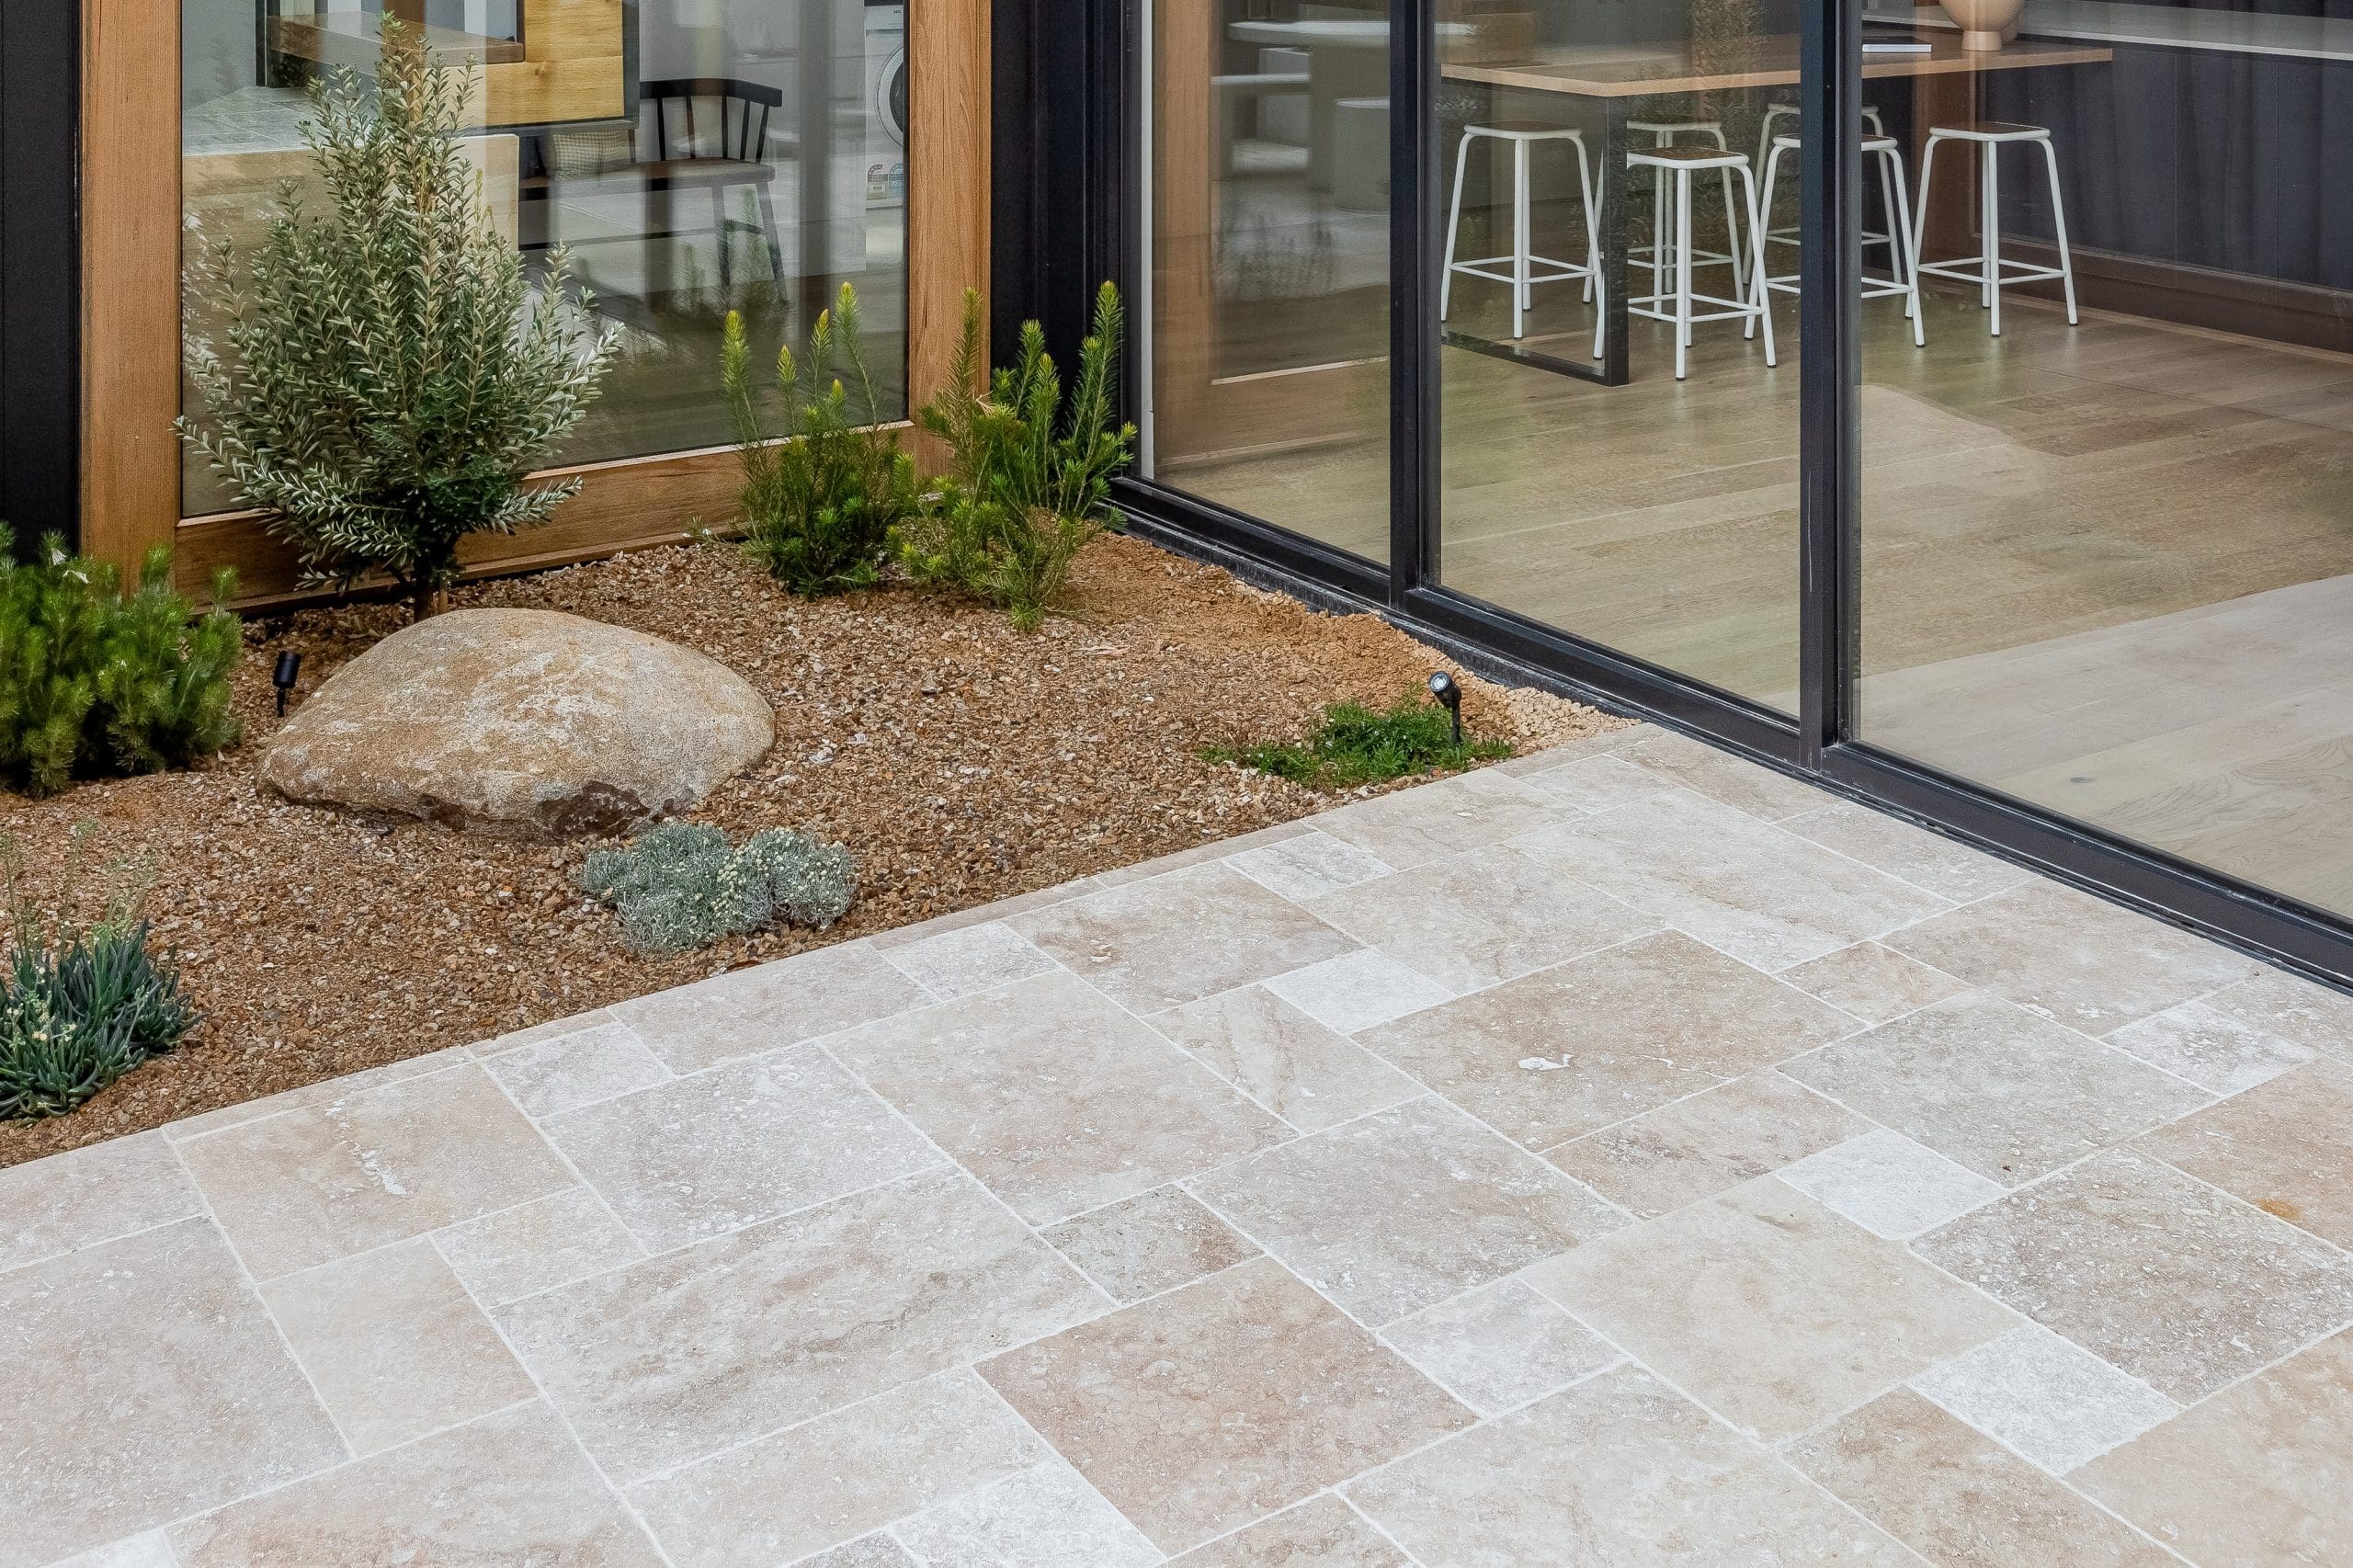 MOCHA UNFILLED & TUMBLED TRAVERTINE_RMS TRADERS_NATURAL STONE POOL PAVING INTERNAL TILES SUPPLIER MELBOURNE (1)